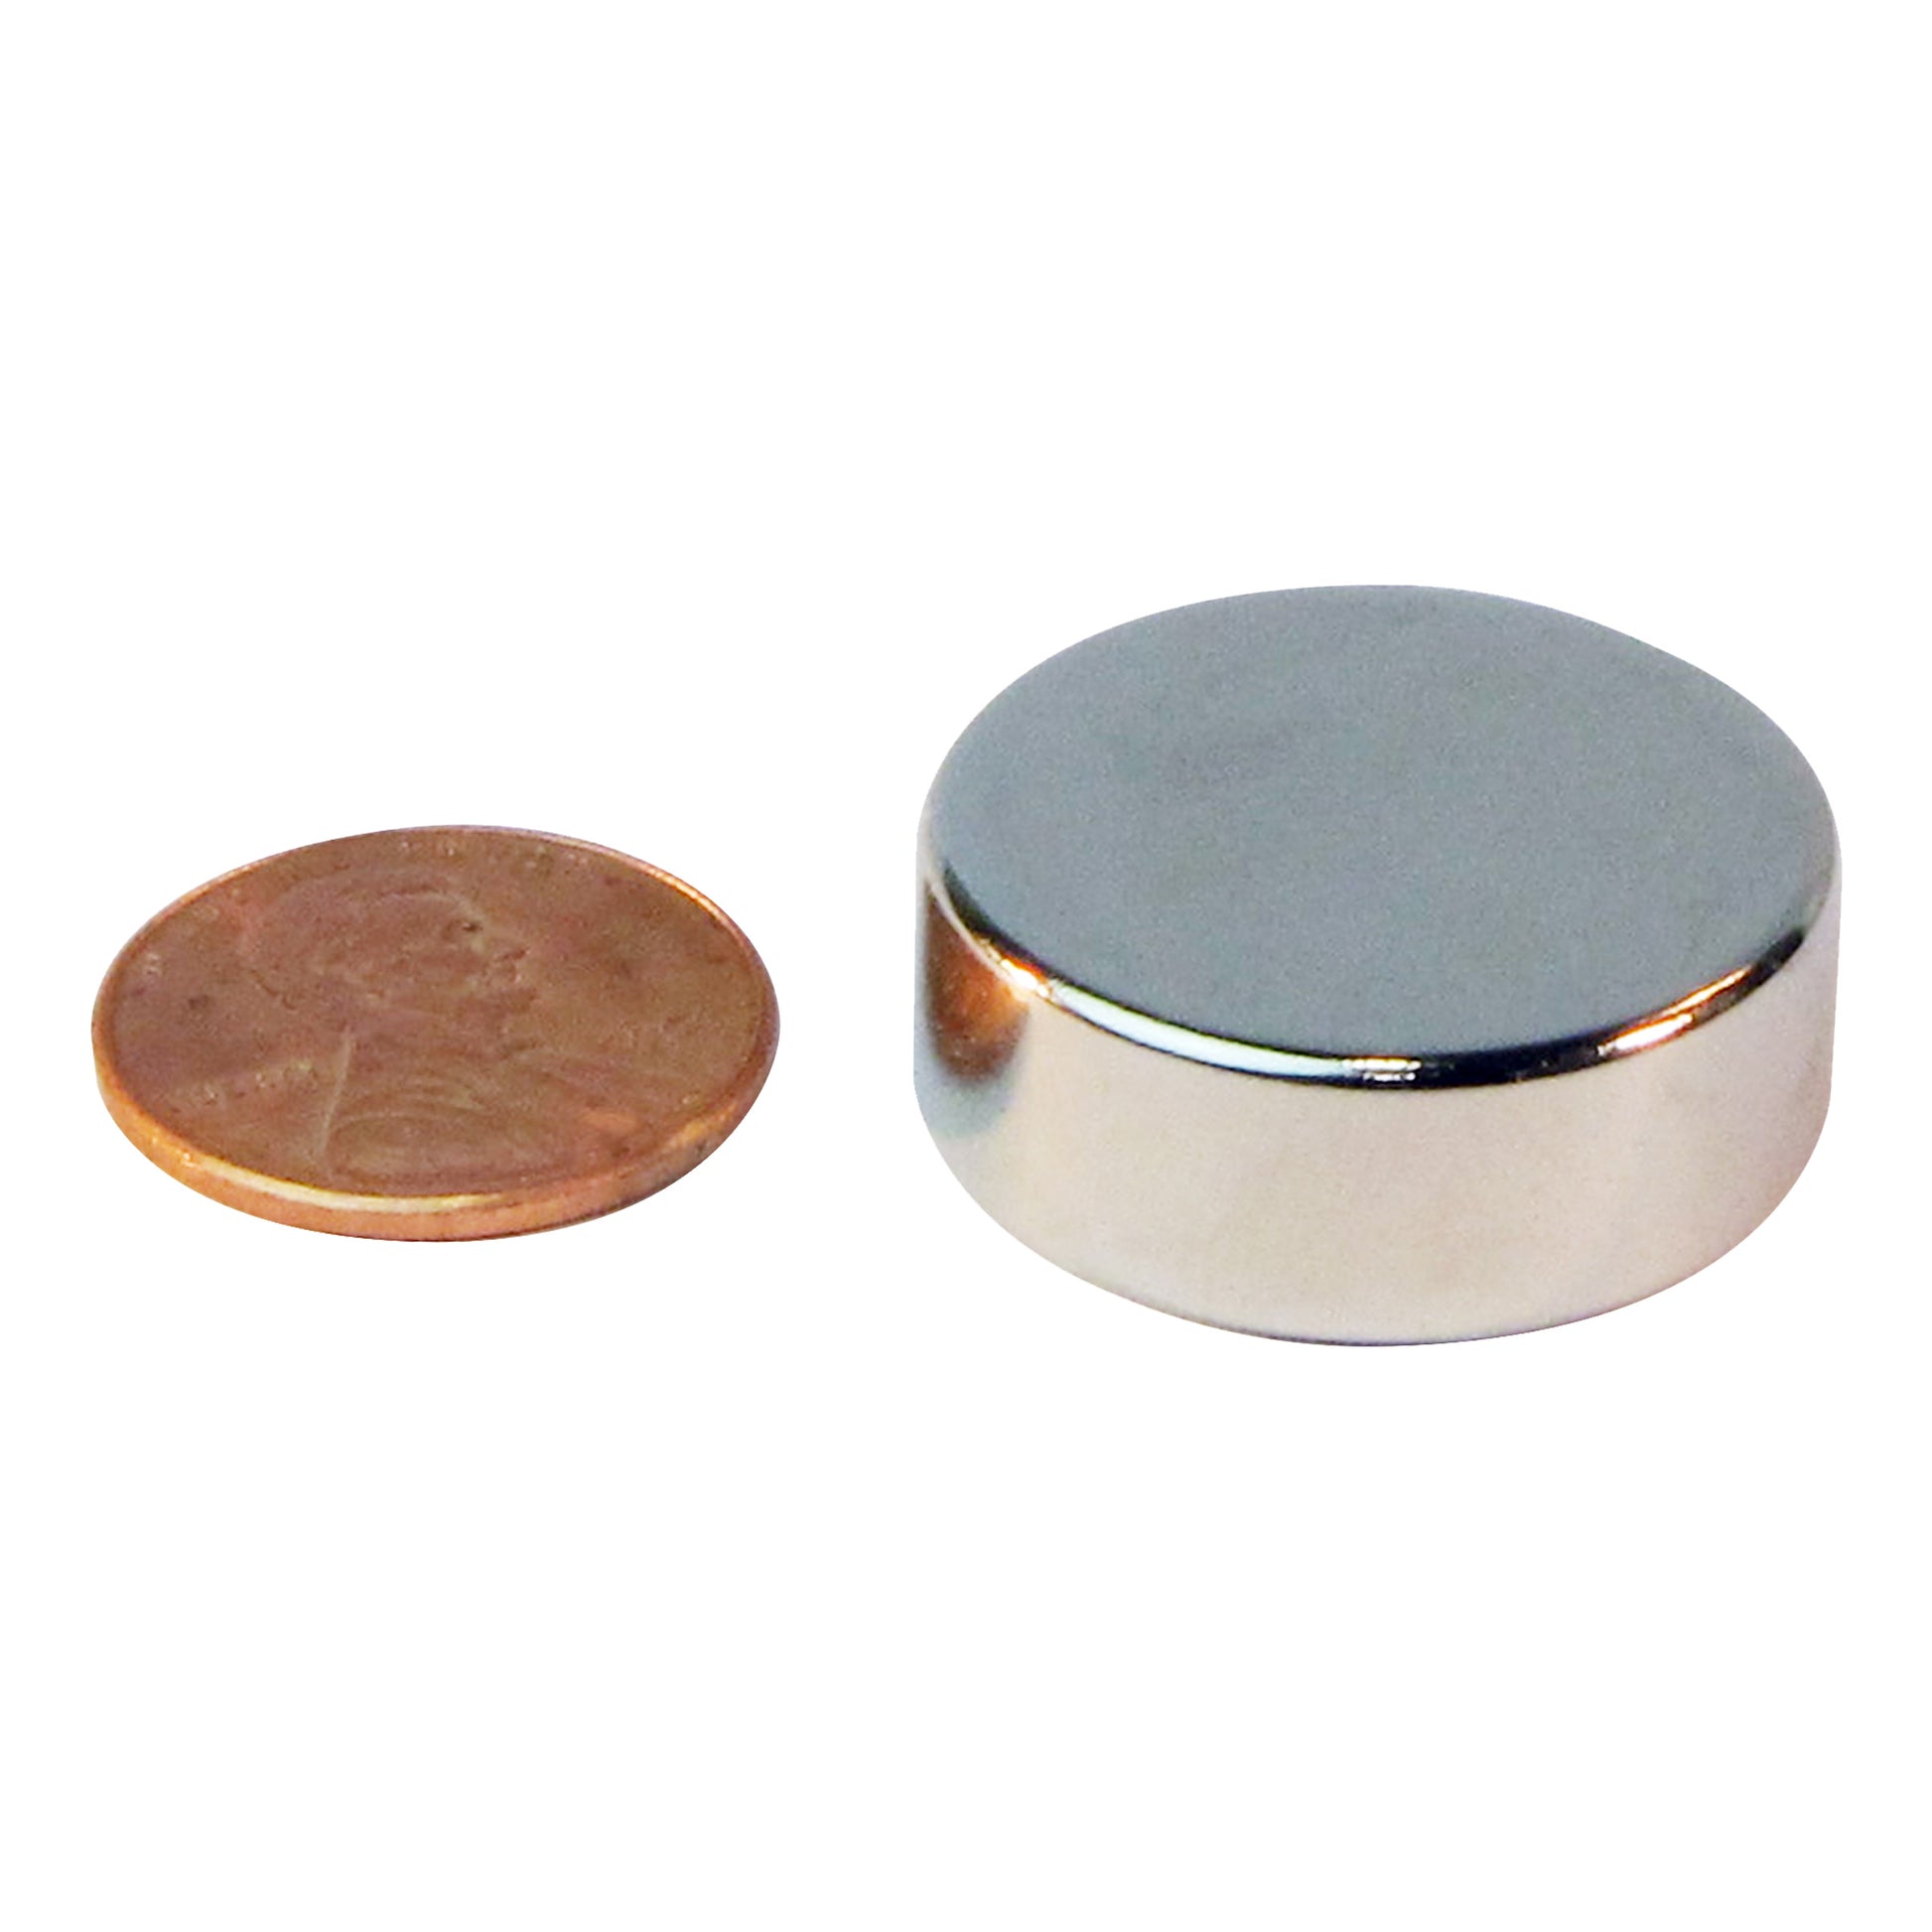 Load image into Gallery viewer, ND45-1X37N Neodymium Disc Magnet - Compared to Penny for Size Reference